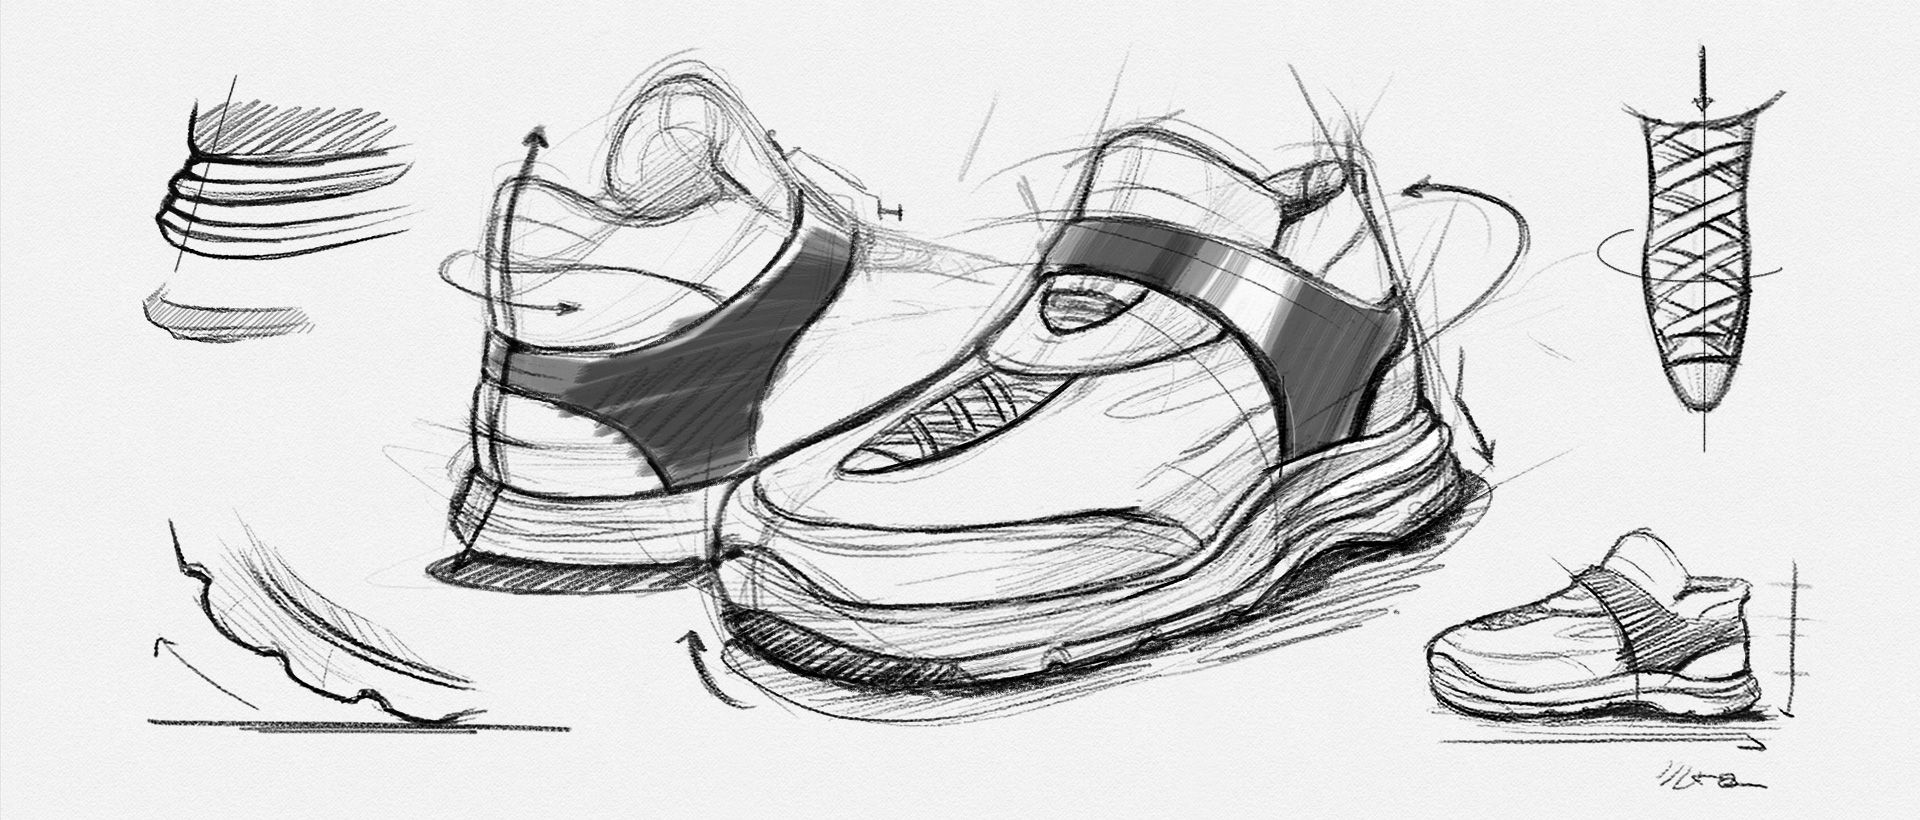 Illustrated image of a sketch of sneakers from multiple angles.